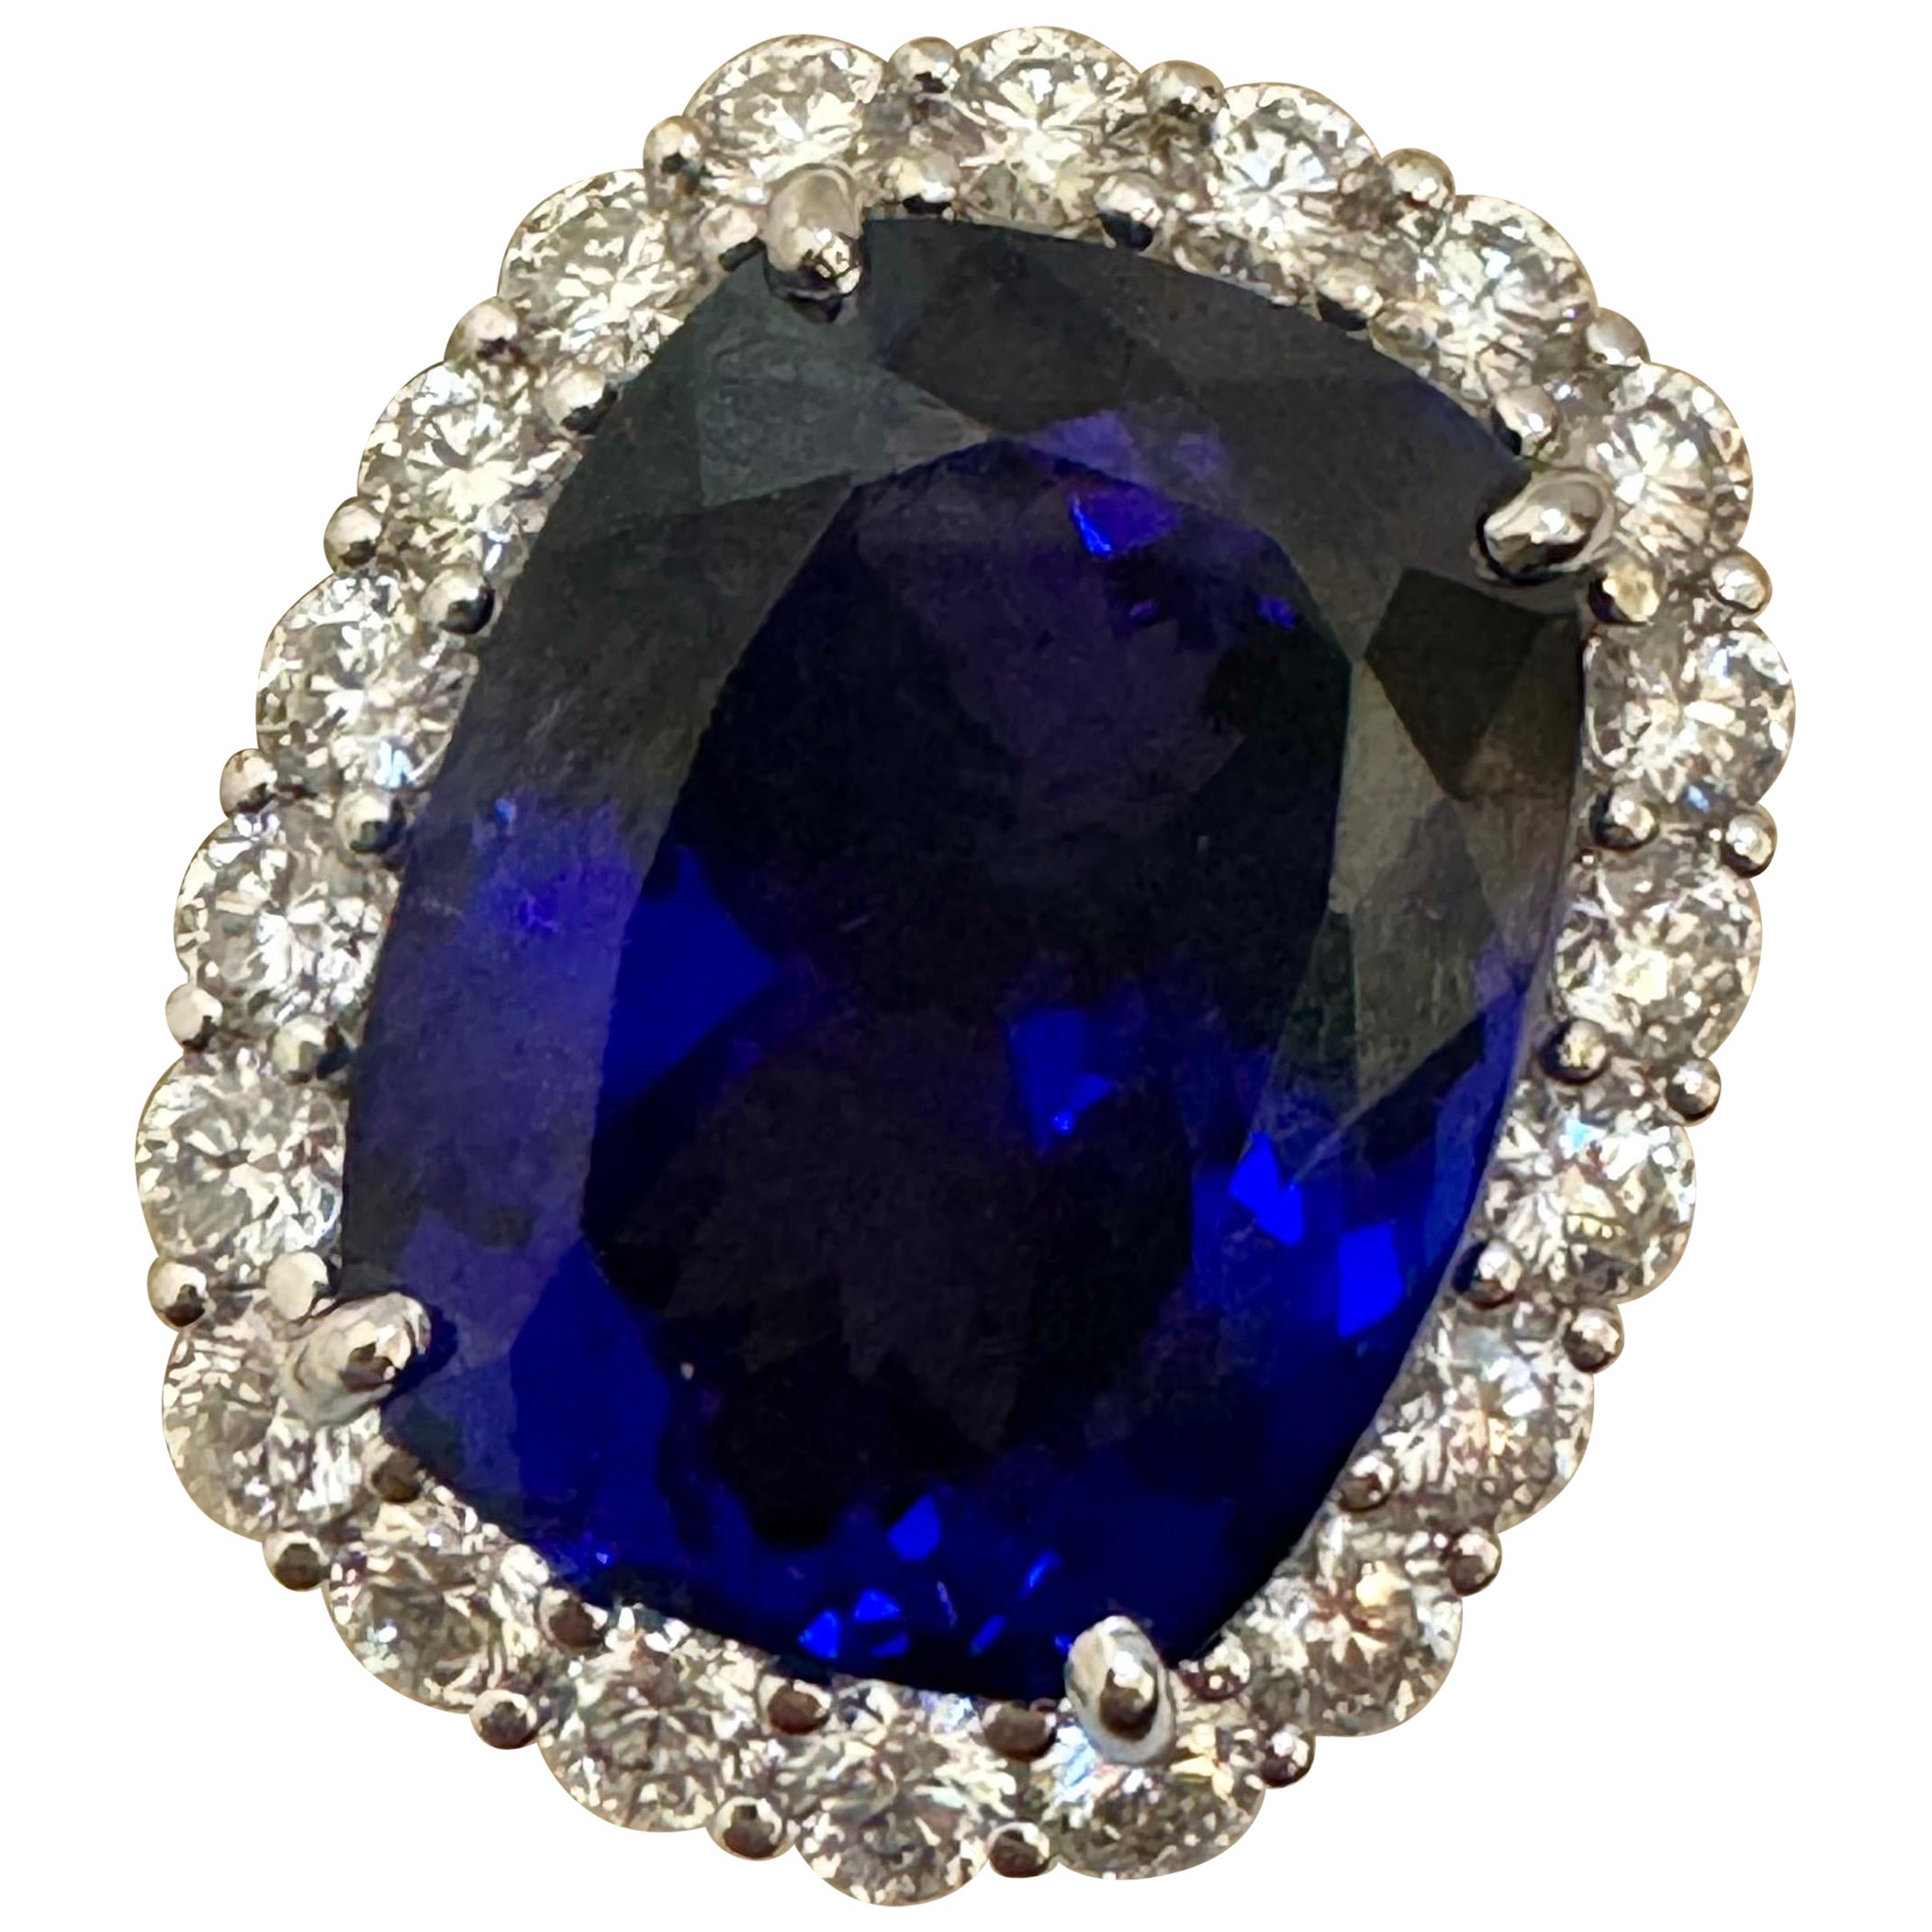 43.74 Ct Cushion-Cut Tanzanite & 4 Ct  Diamond Ring in 14K White Gold Size 6.5 For Sale